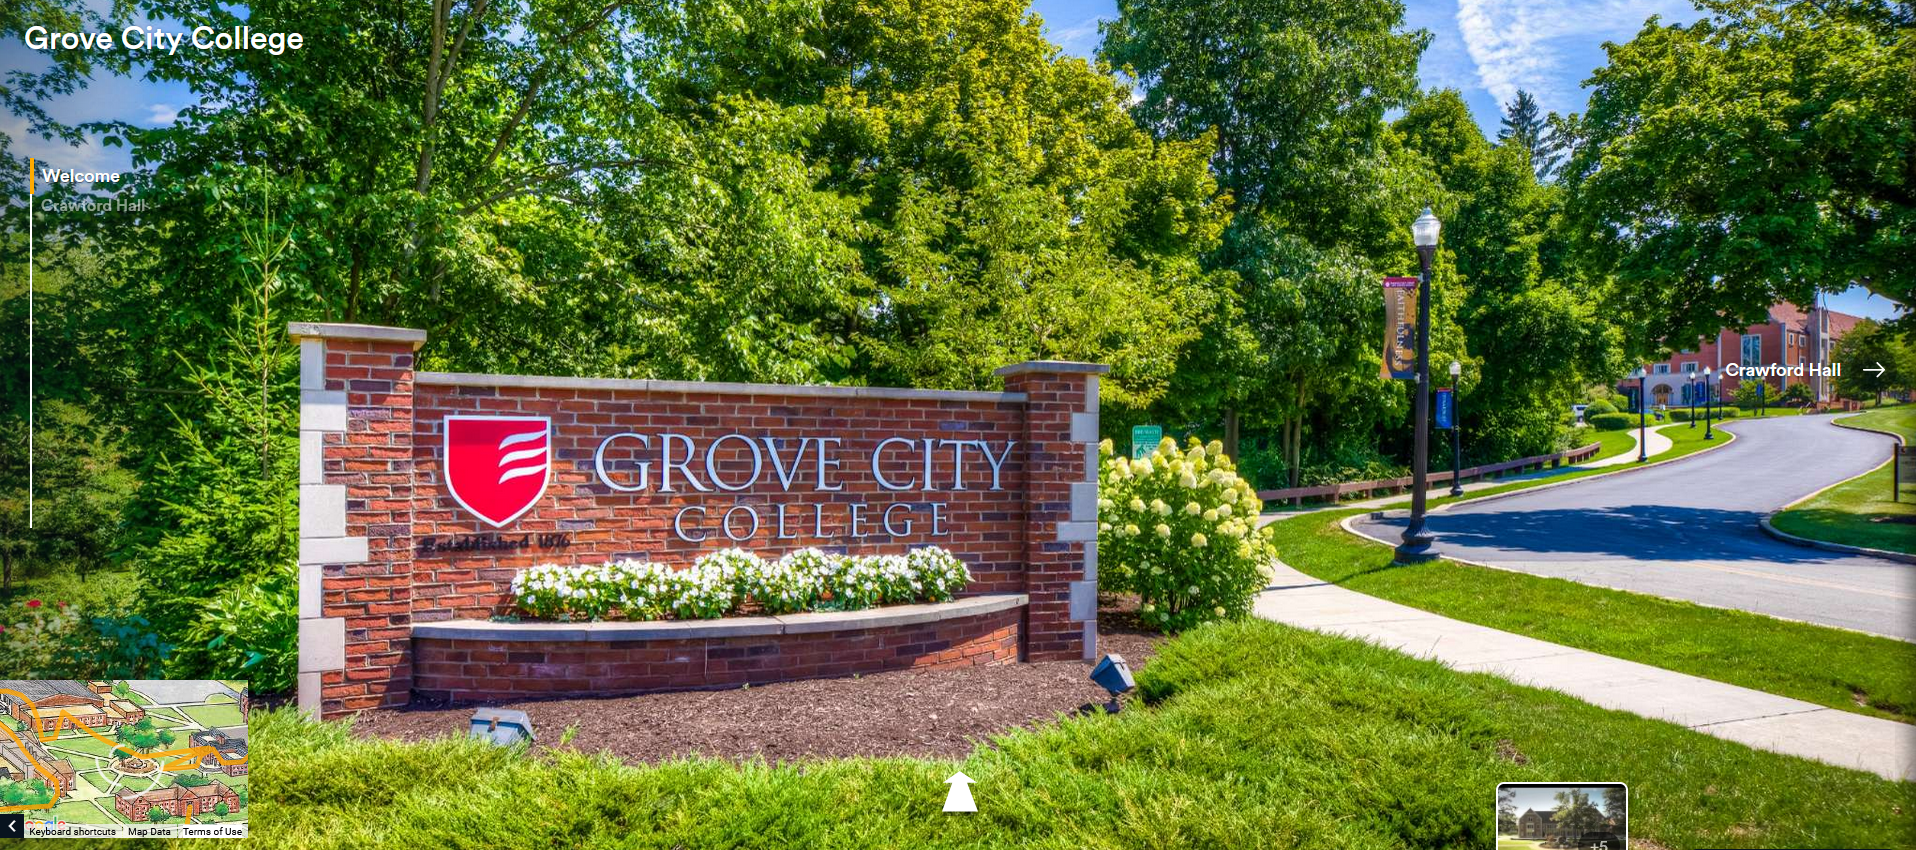 Grove City College Photo and Link